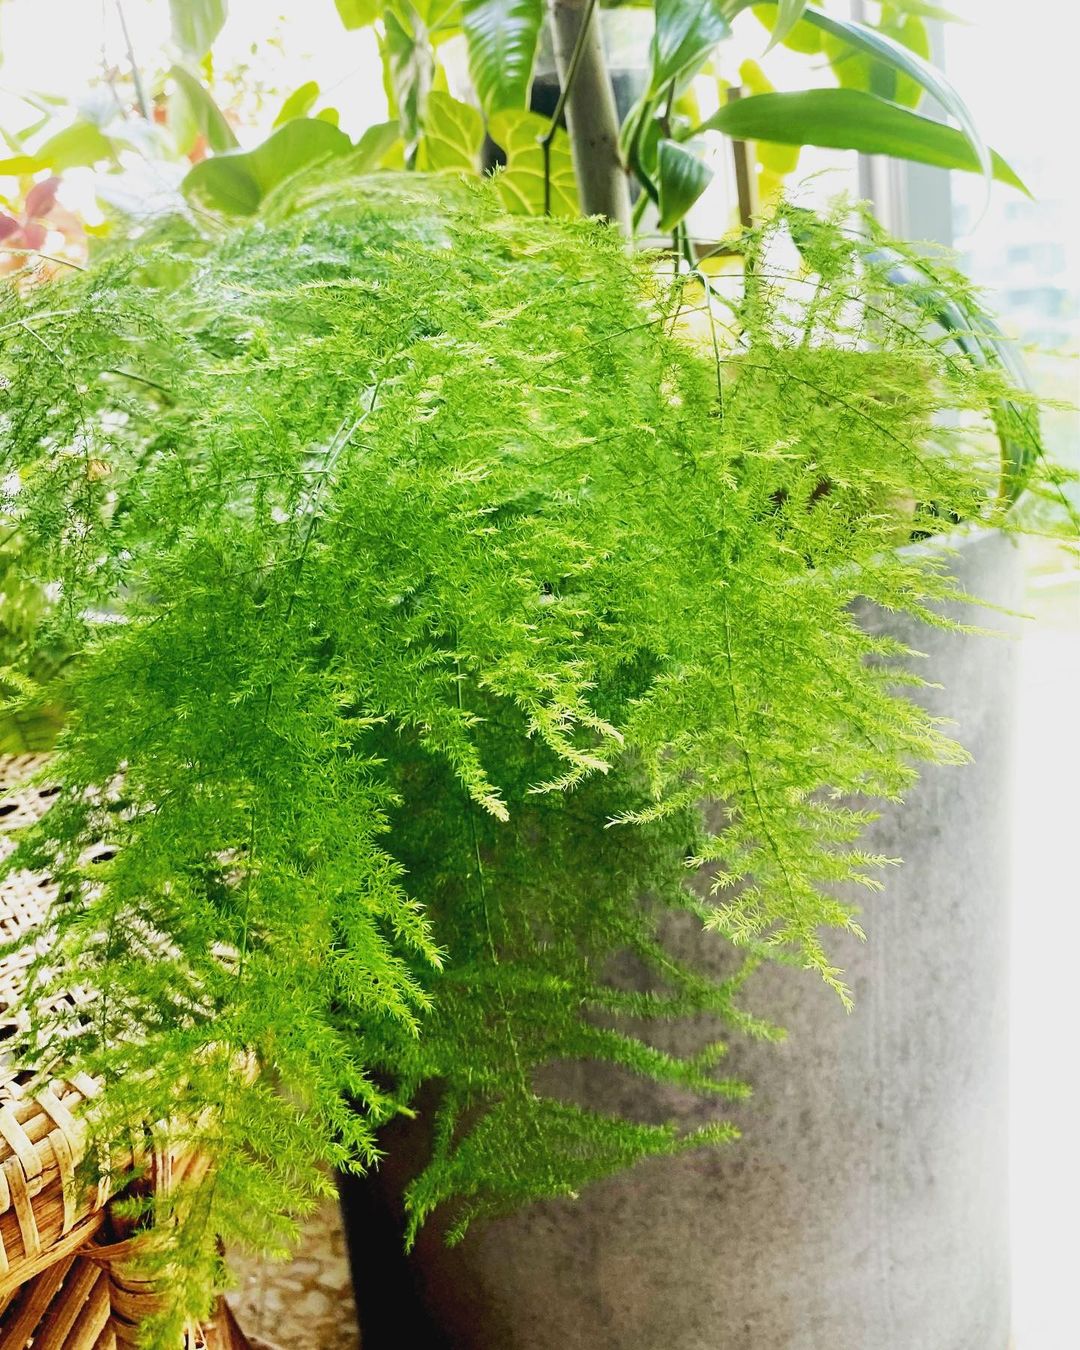 Best foliage for bouquets asparagus fern from Evanthia - on Thursd